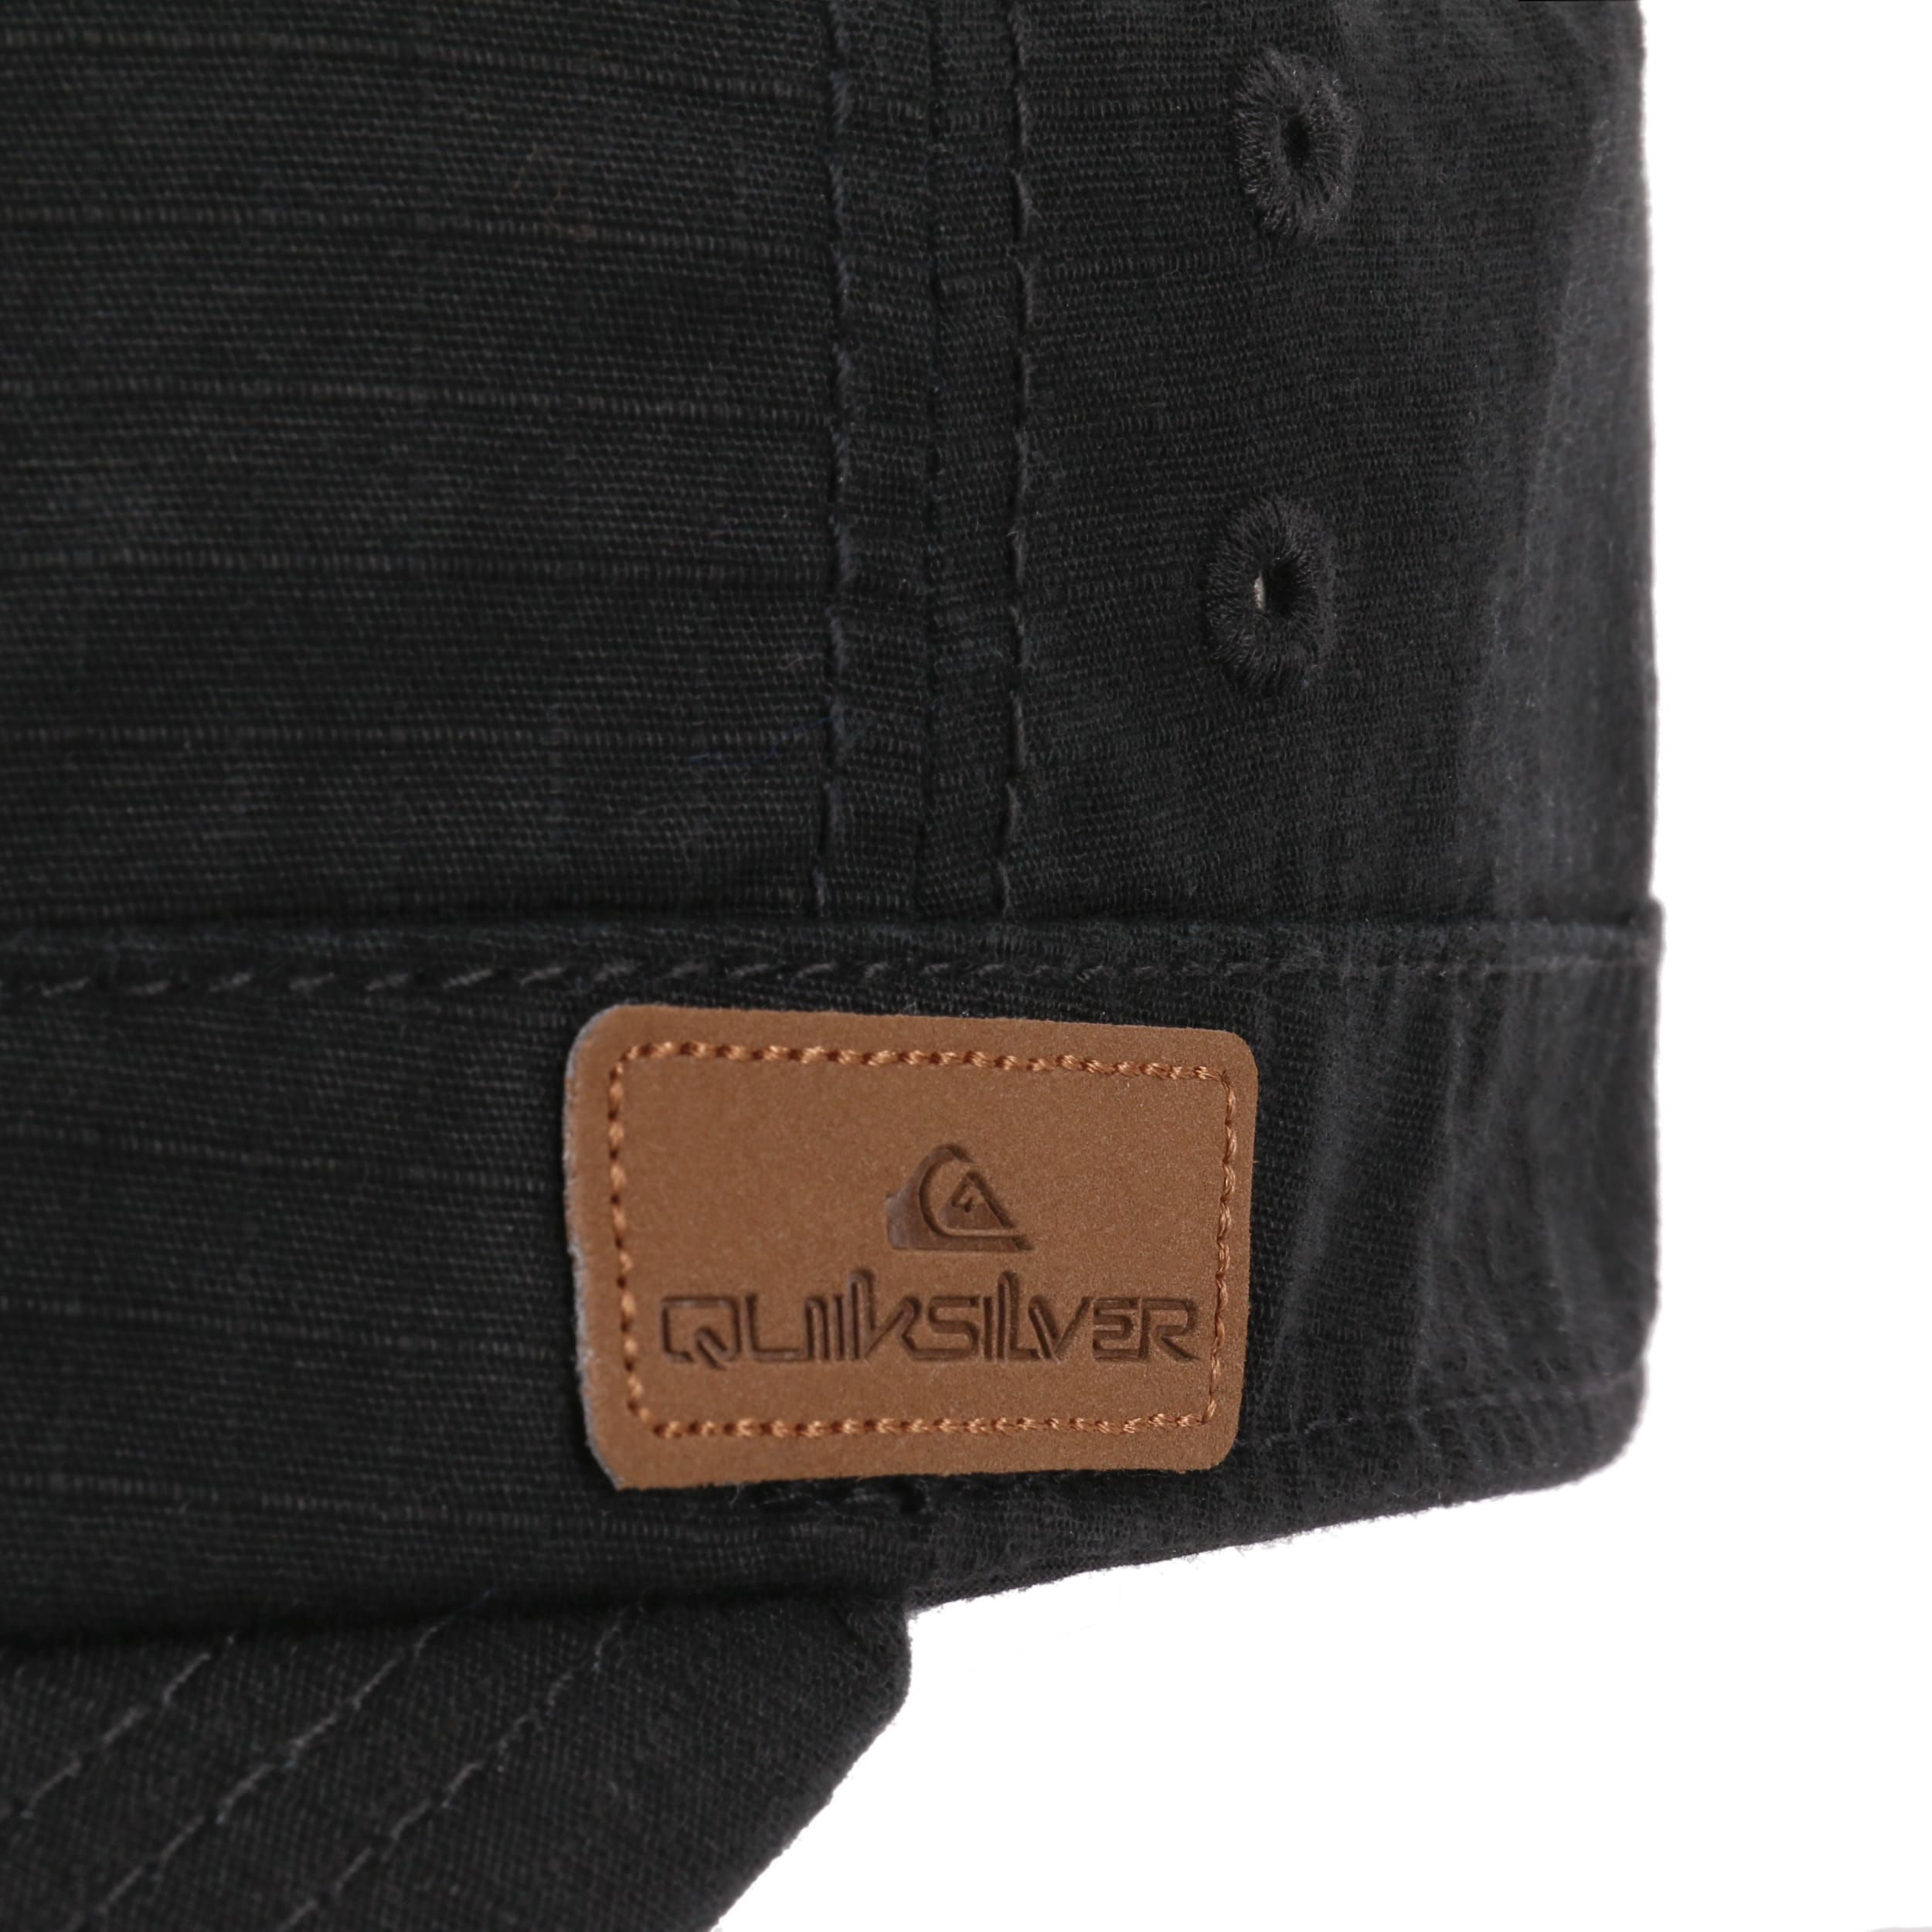 Renegade 2 Army - Quiksilver by Cap € 32,95